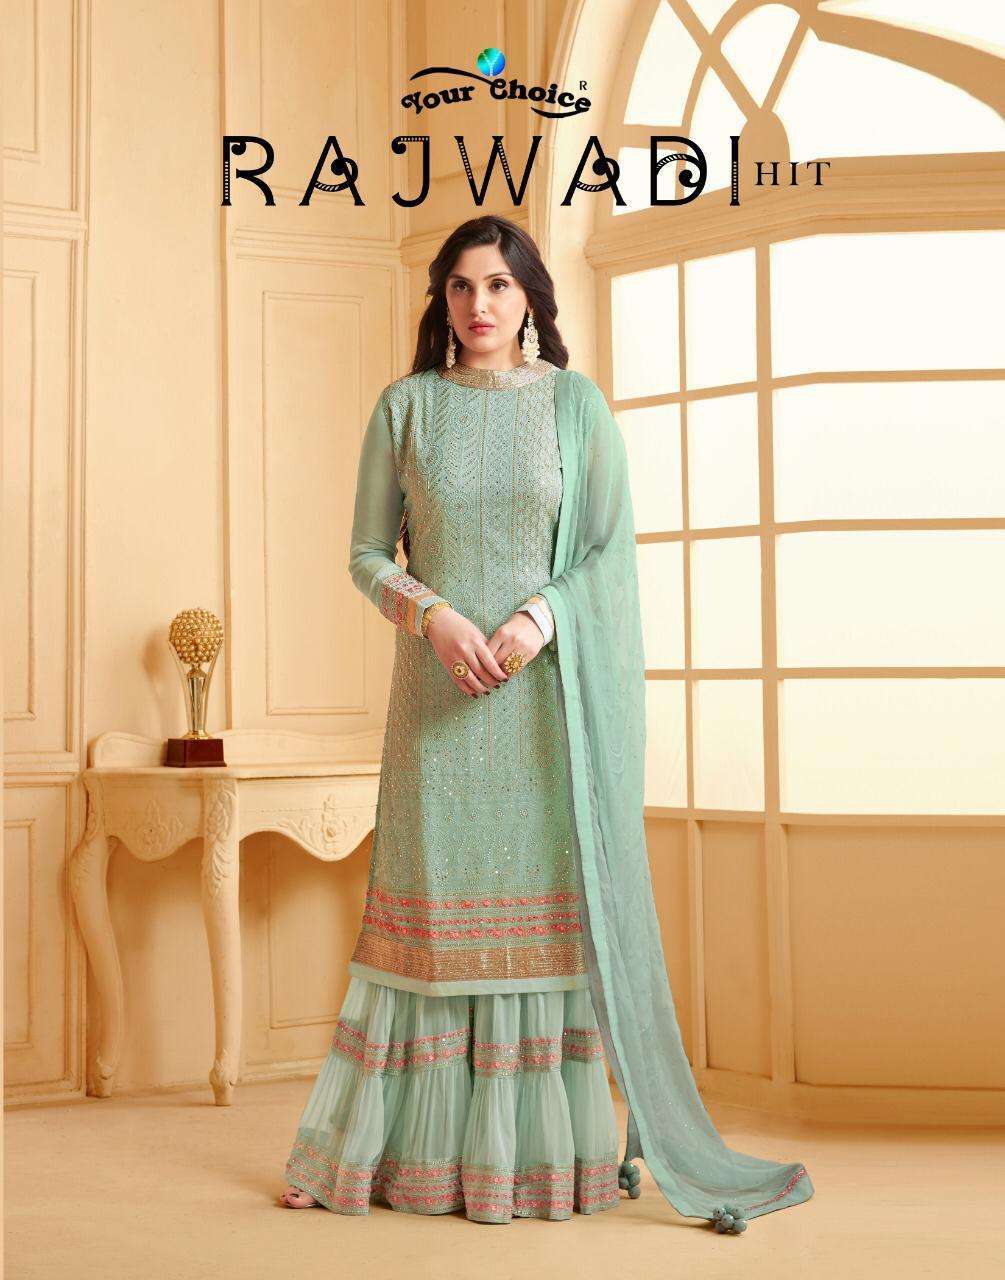 Your choice Rajwadi Hits Faux georgette With Embroidery Work...